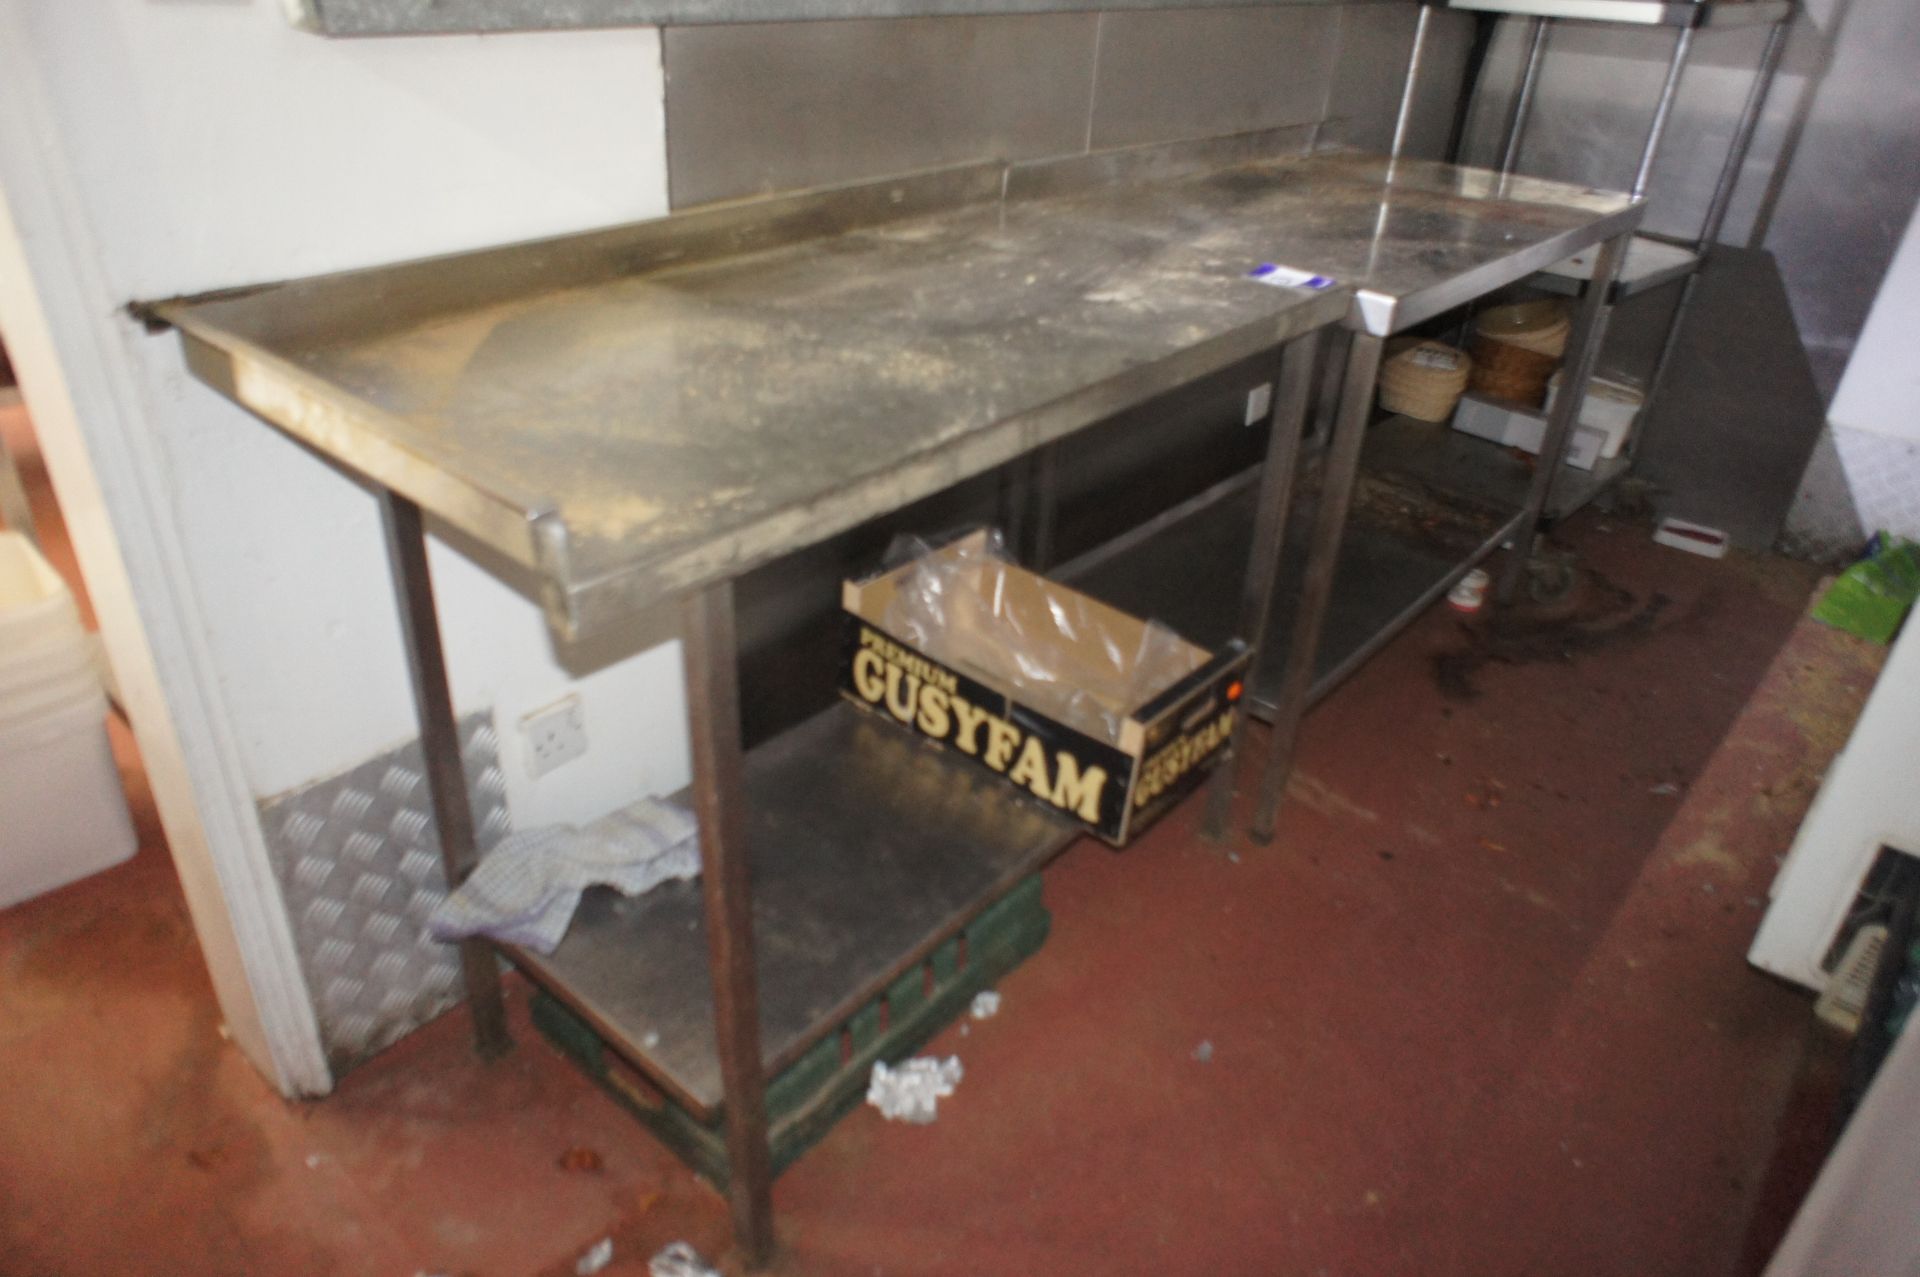 2 x Various stainless-steel preparation tables